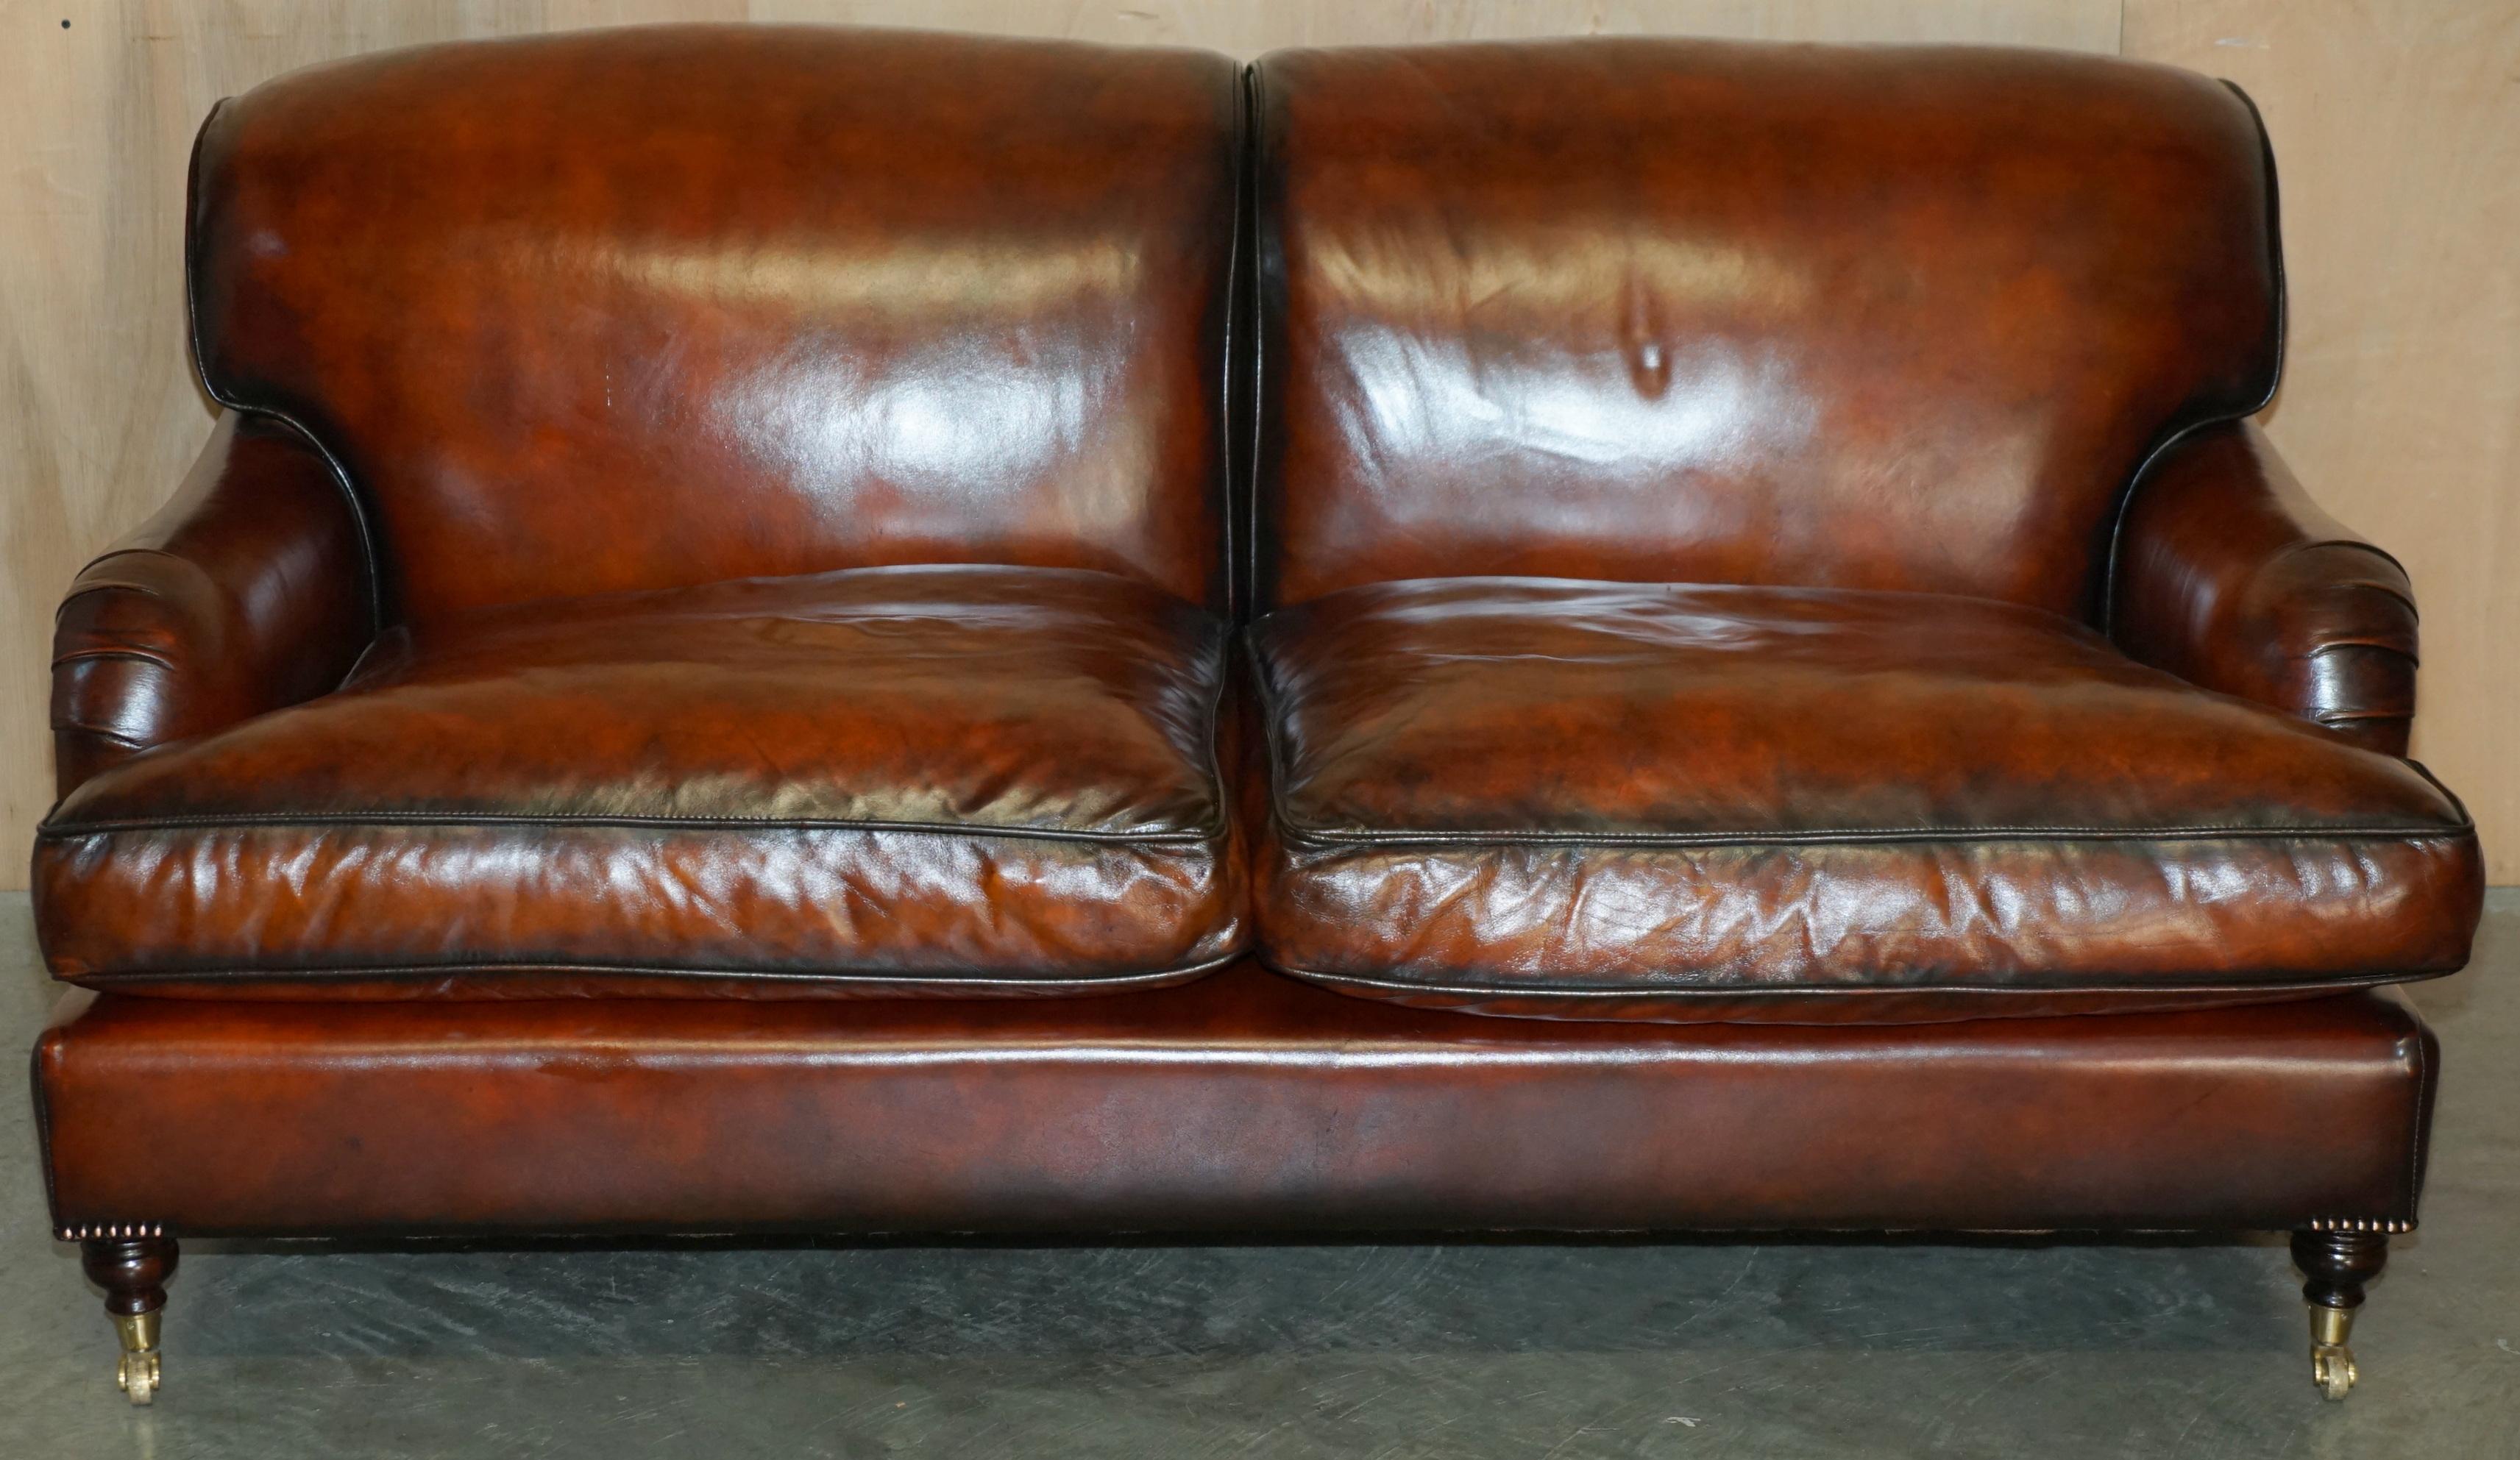 Royal House Antiques

Royal House Antiques is delighted to offer for sale this fully restored Bordeaux brown leather two to three seat sofa made in the George Smith Howard & Son's style 

Please note the delivery fee listed is just a guide, it